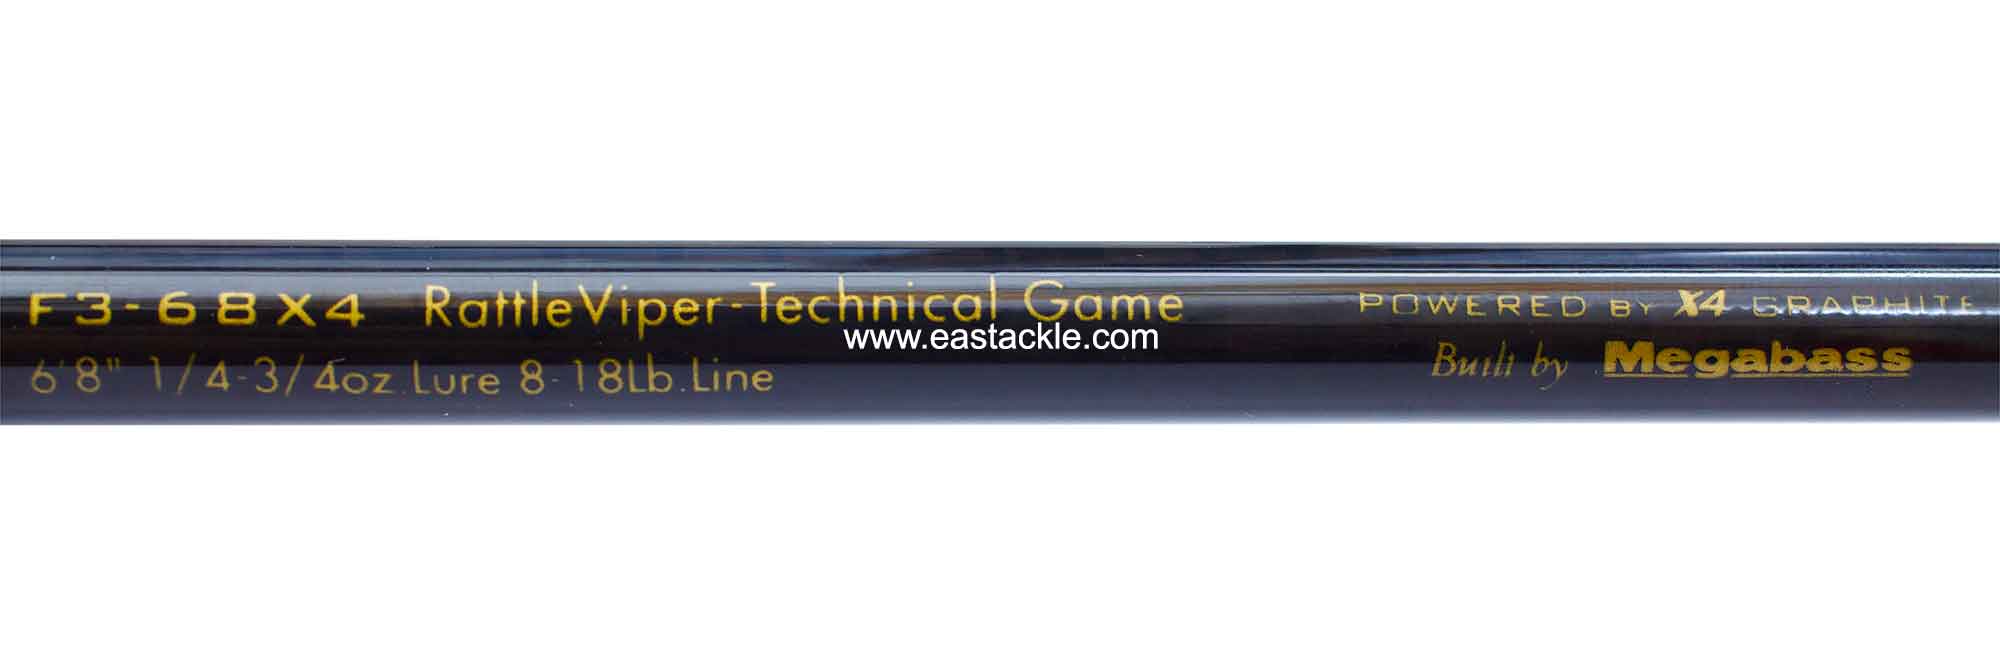 Megabass - Orochi X4 - F3-68X4 - RATTLEVIPER-TECHNICAL GAME - Bait Casting Rod - Blank Specifications